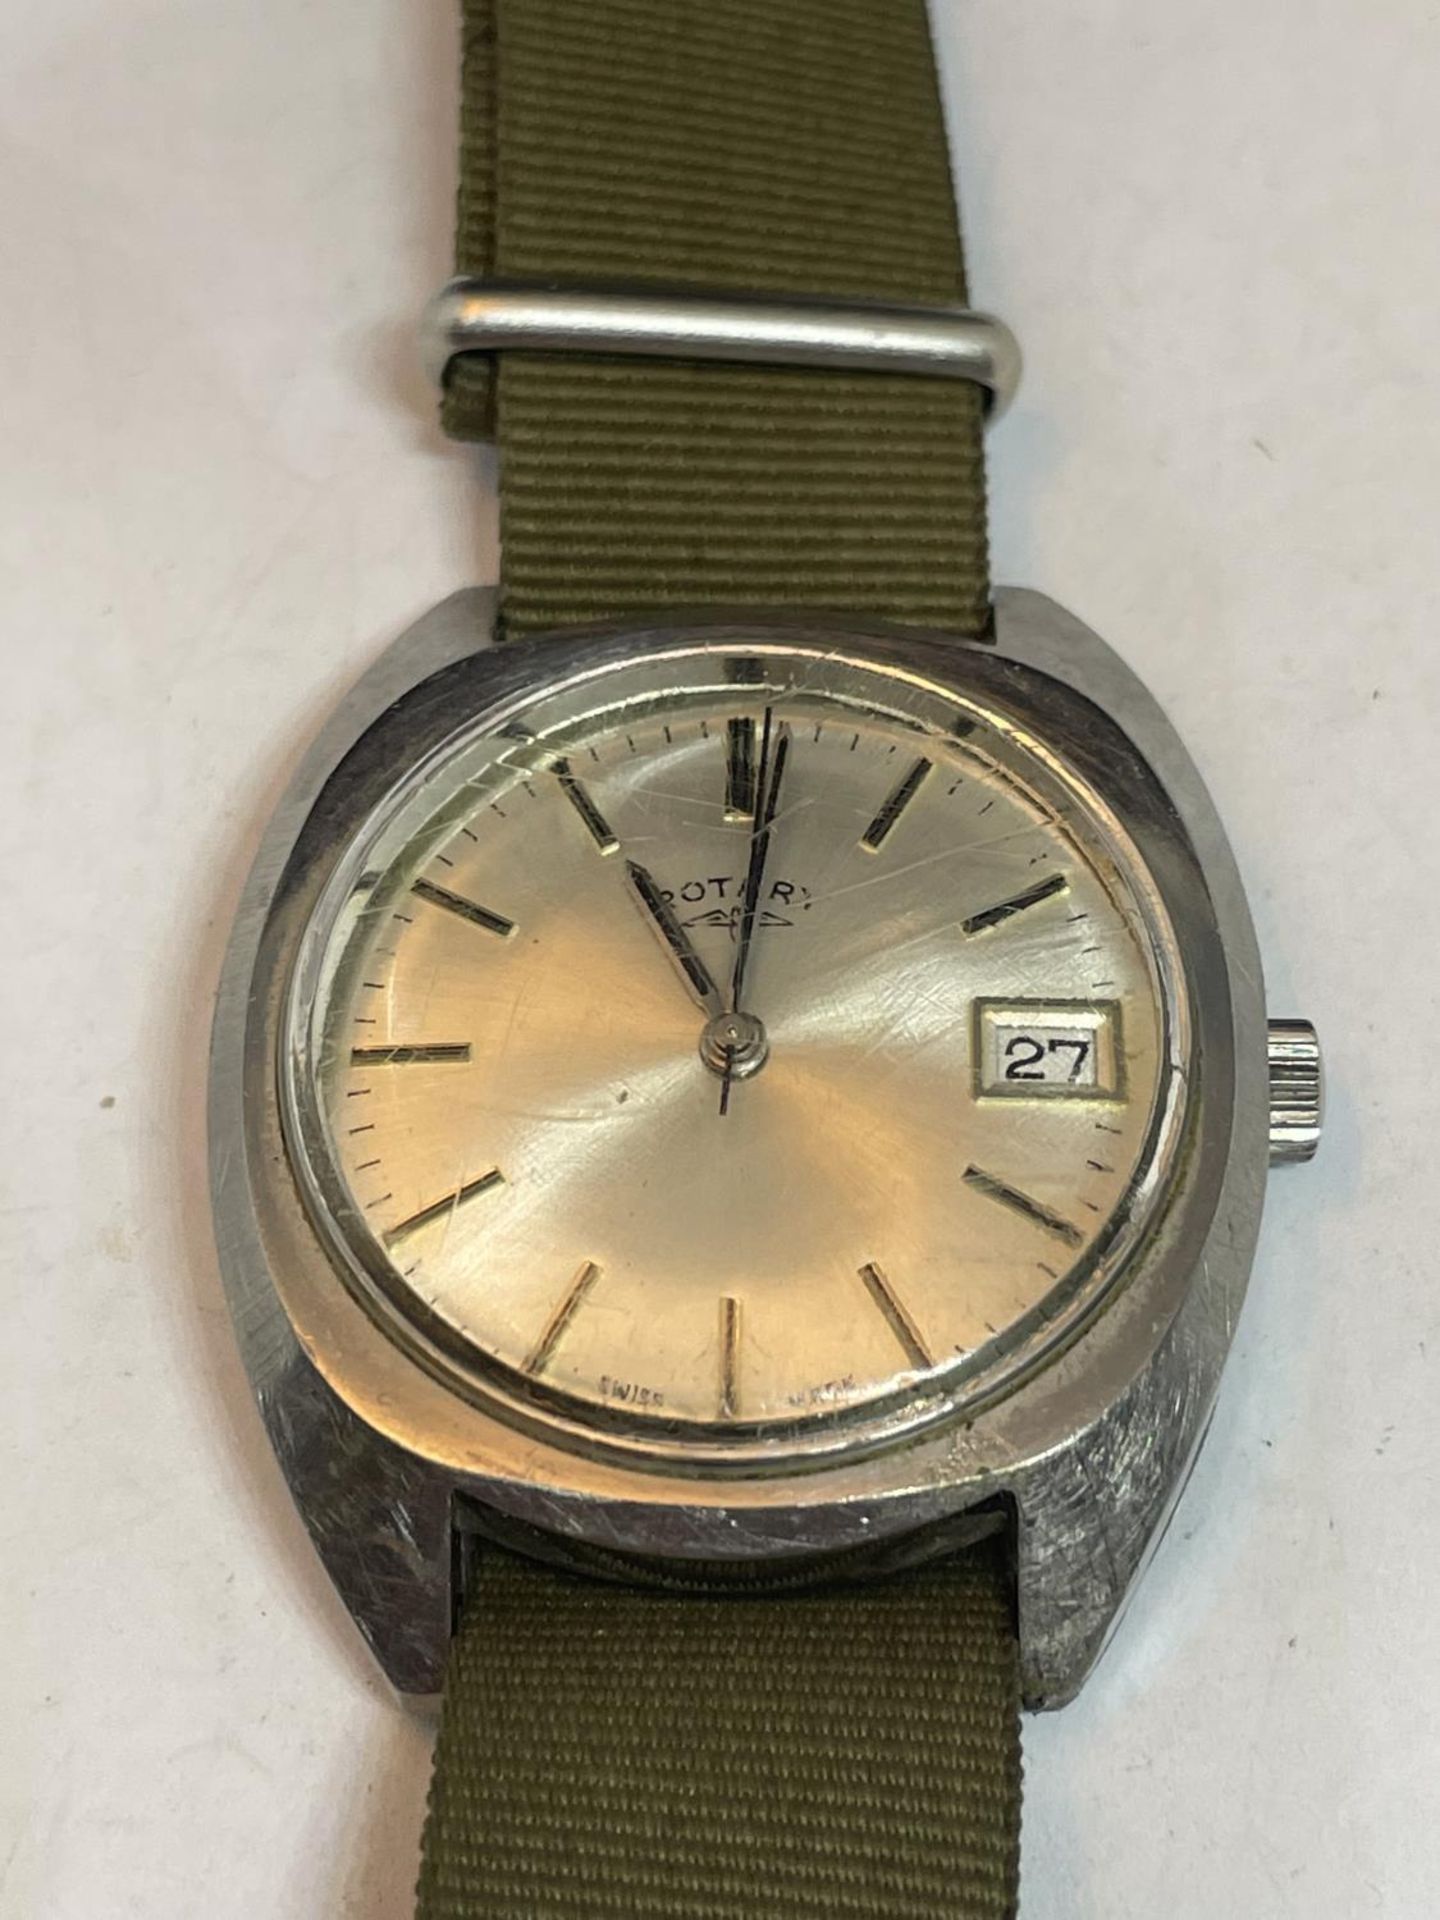 A ROTARY WRISTWATCH SEEN WORKING BUT NO WARRANTY - Image 2 of 3